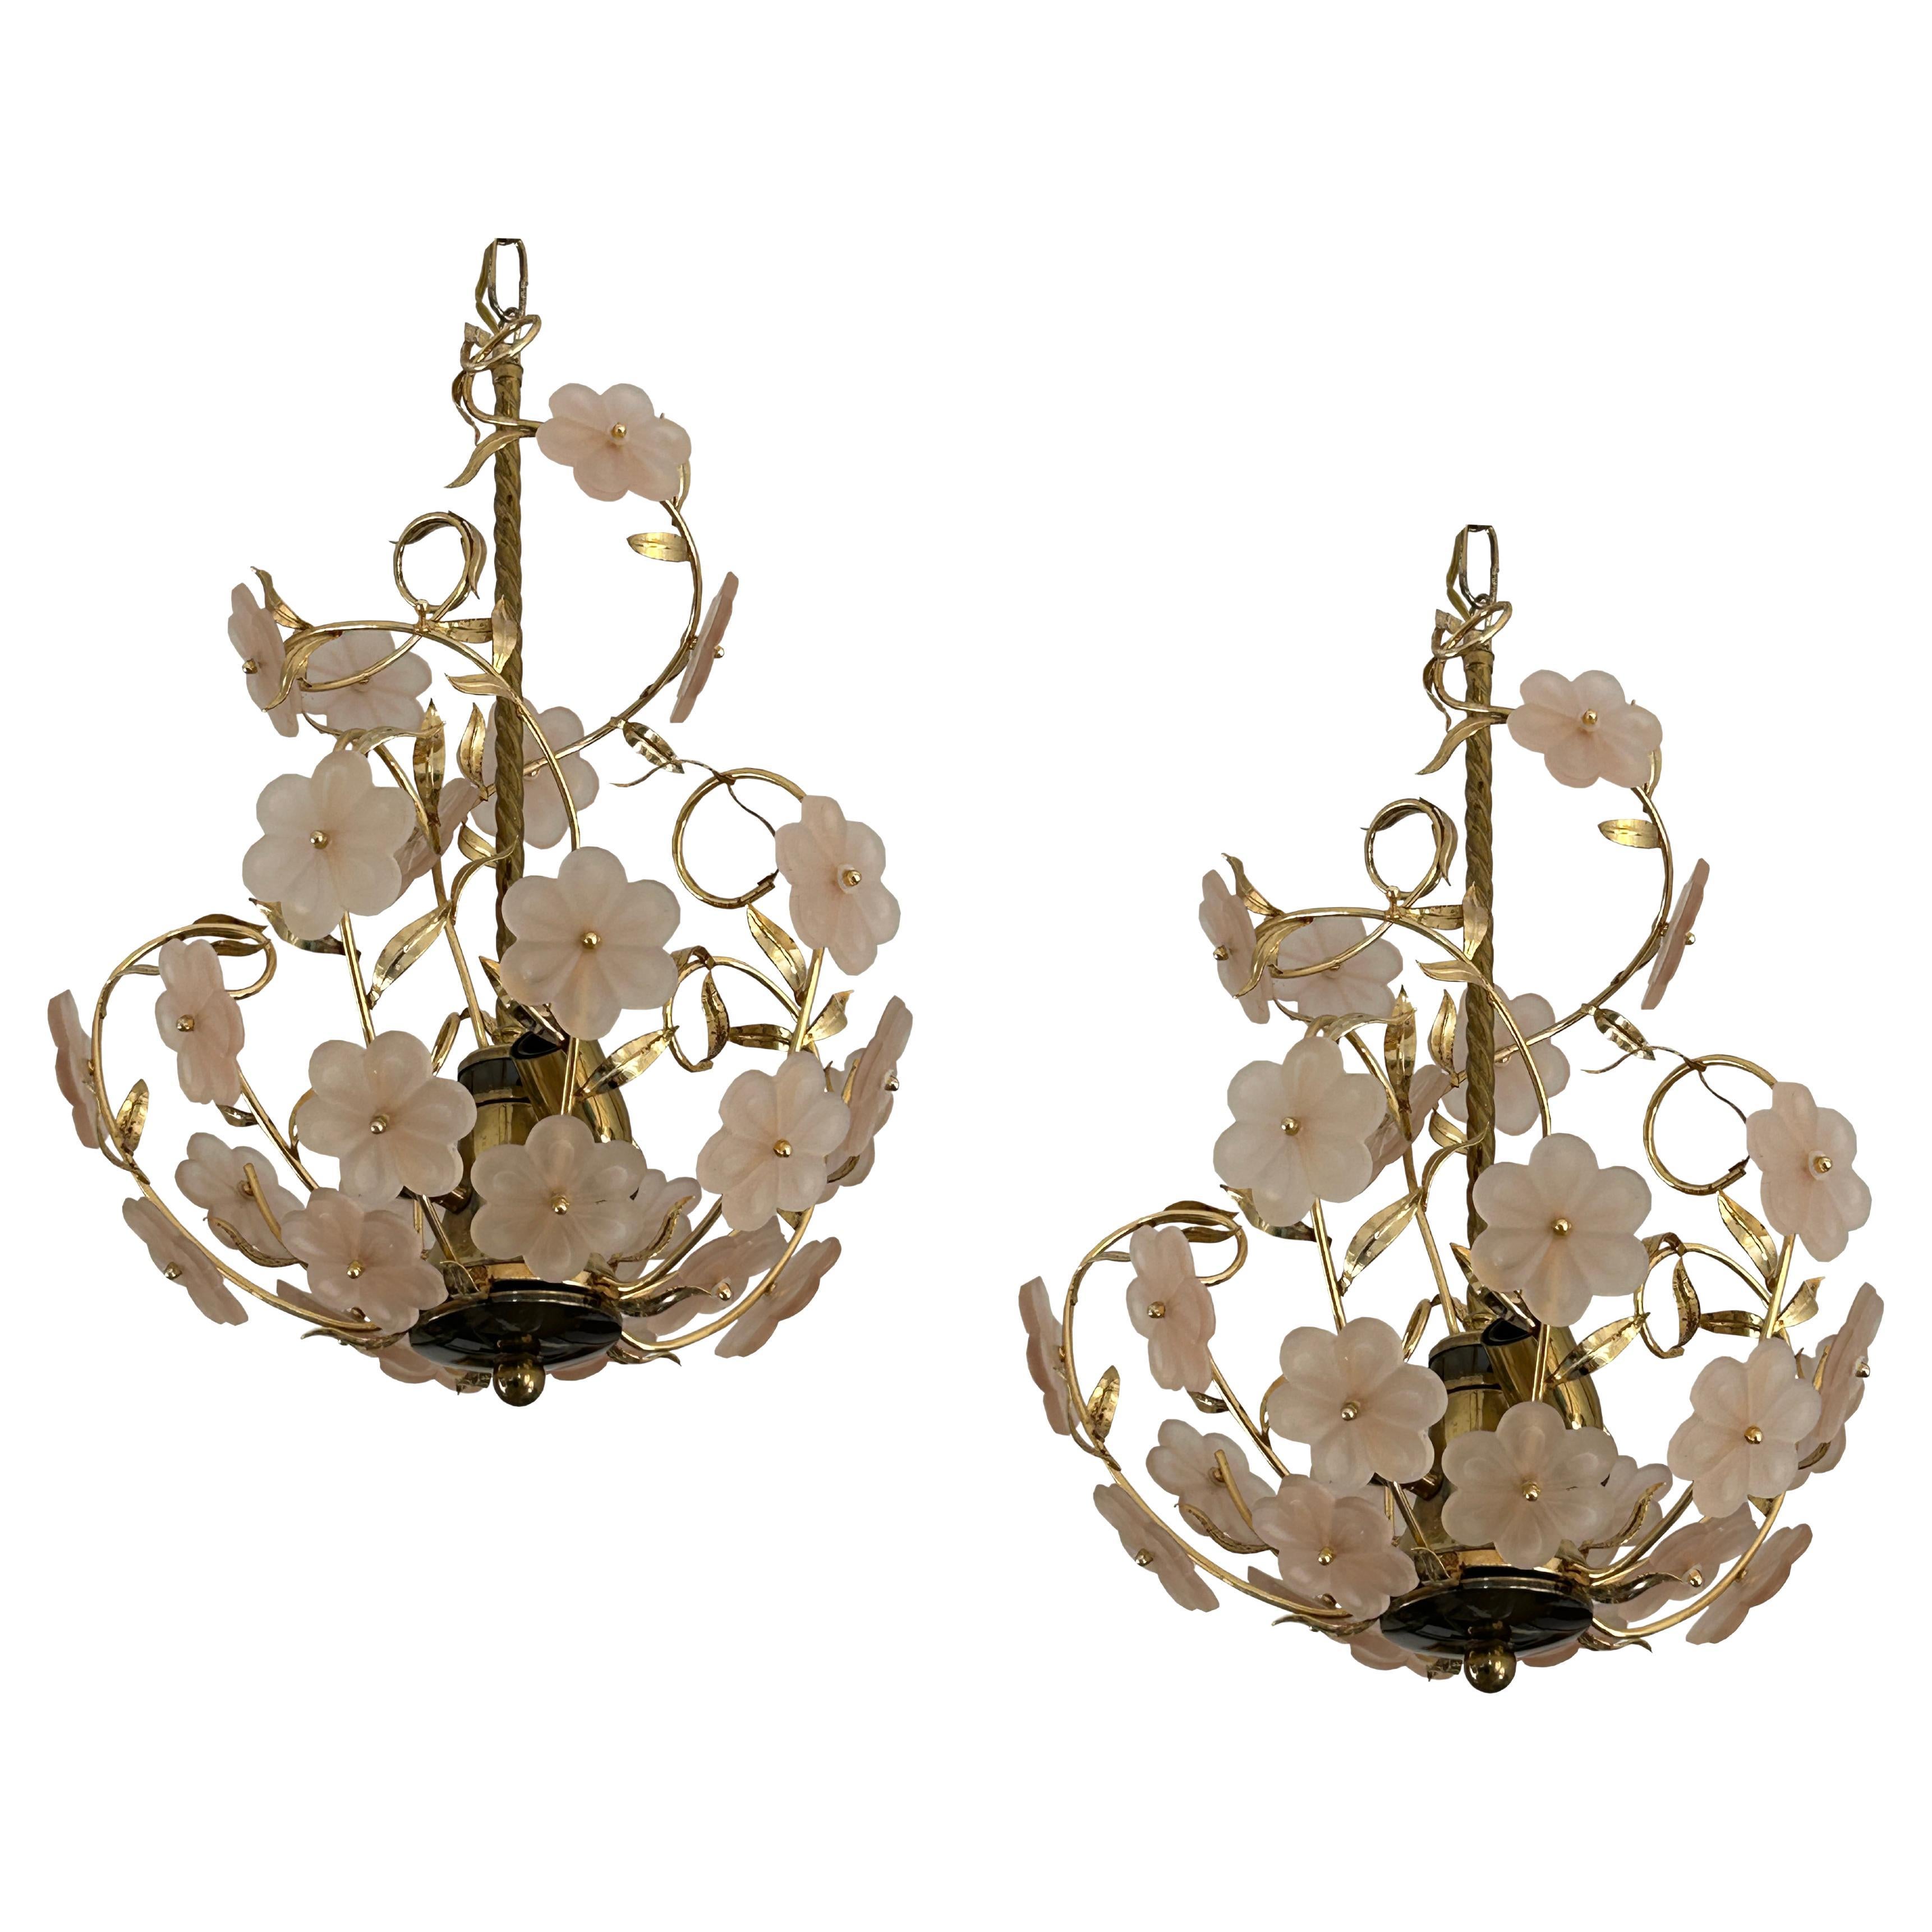 A rare pair of gorgeous Murano chandeliers. A wedding present to a couple in Rome, Italy. Well preserved and absolutely astonishing. Total length, chain included, 85 cm. Three lamp holders. 